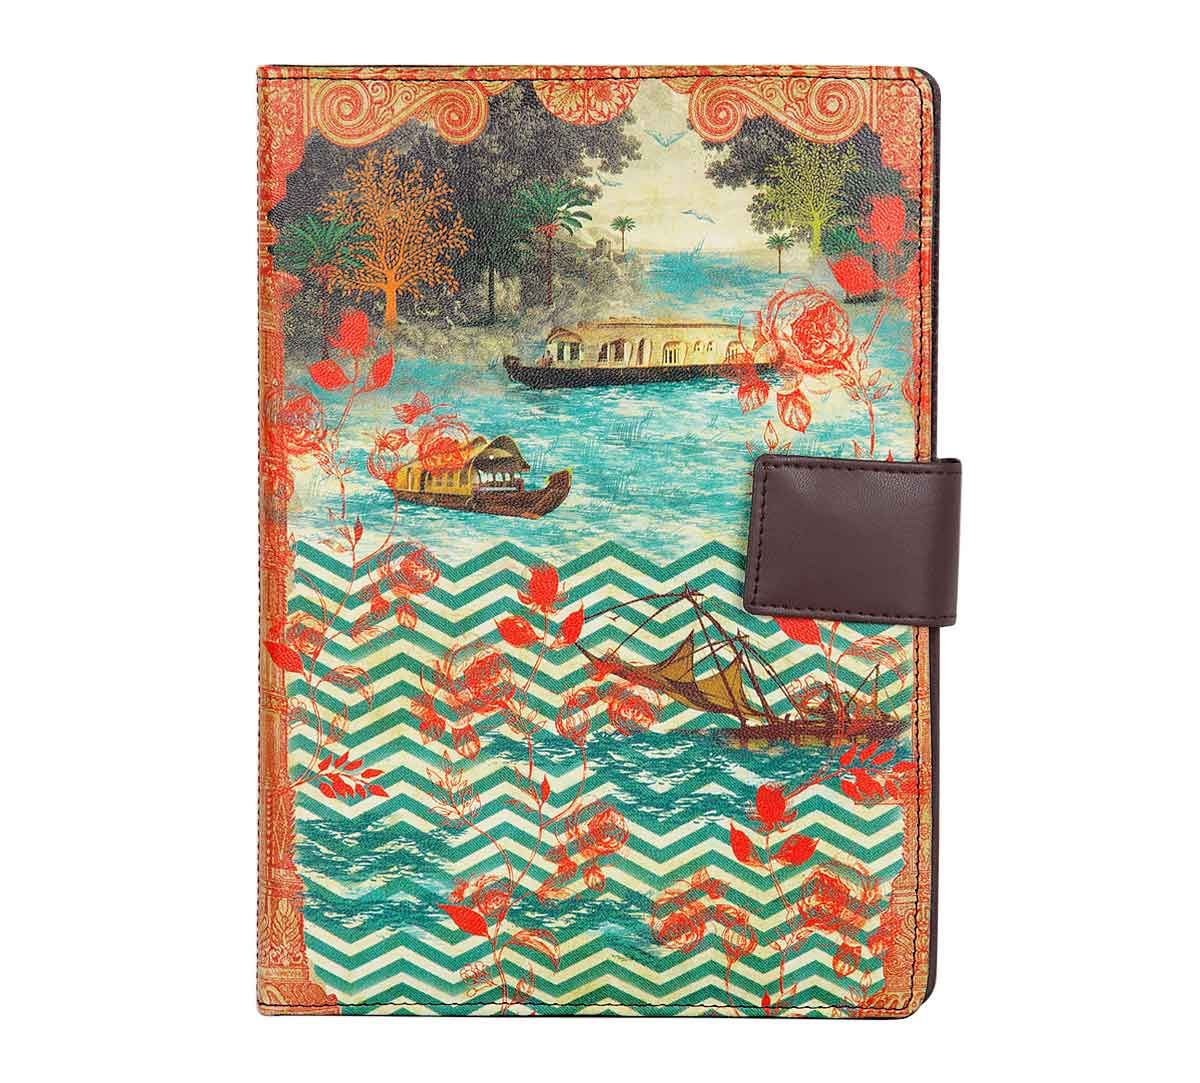 India Circus Chevron Backwaters Notebook Planner